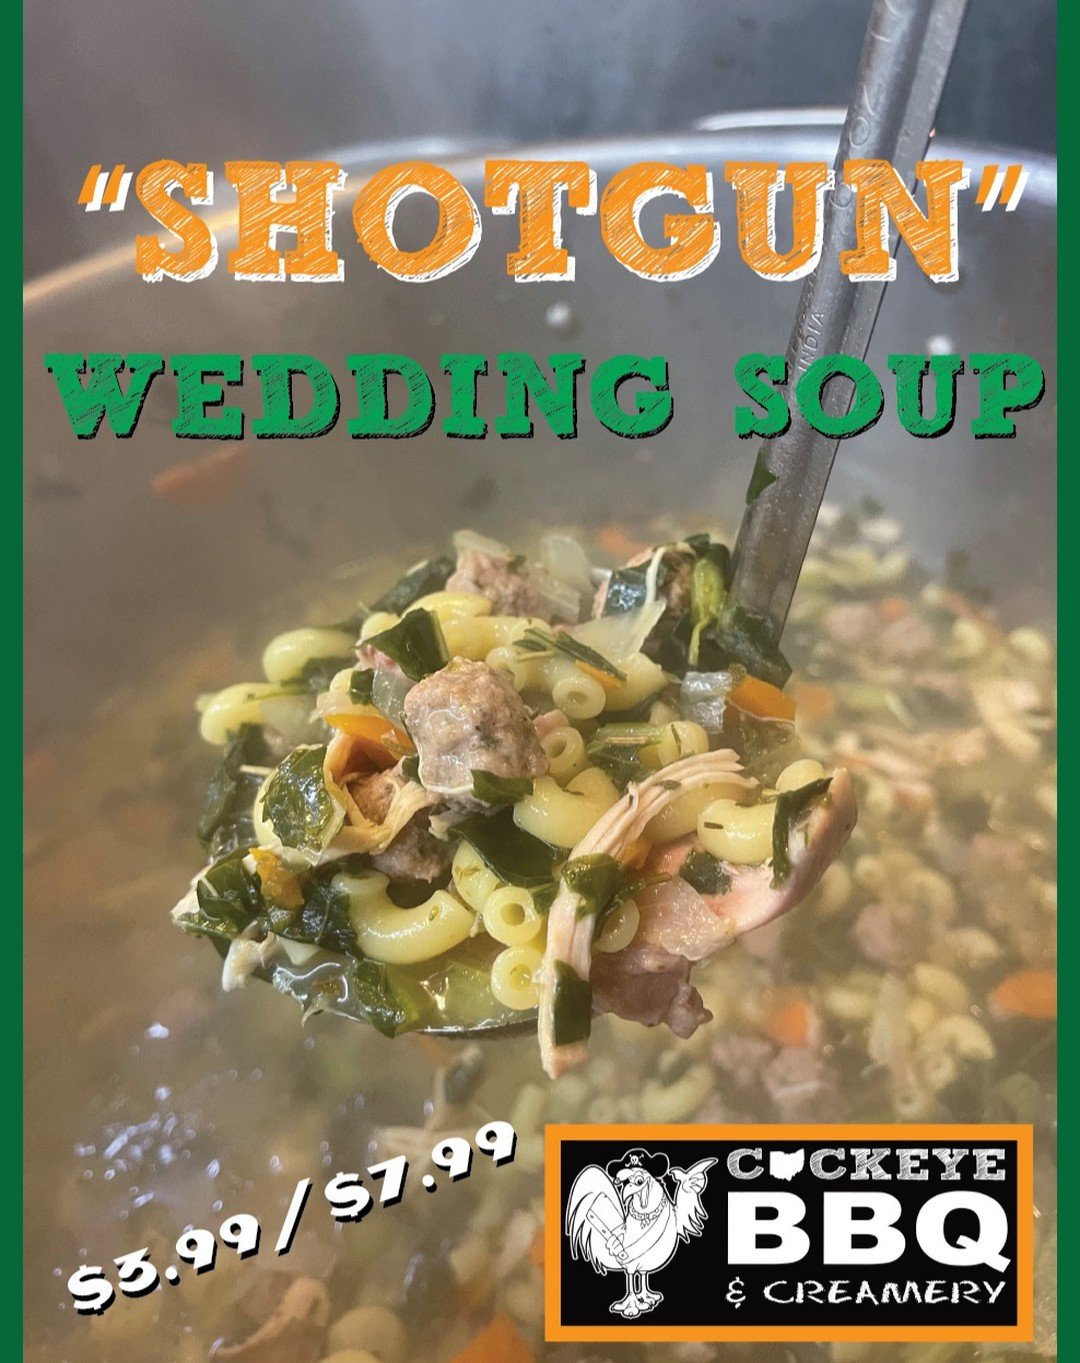 &quot;SHOTGUN&quot; WEDDING SOUP
Our fun smokehouse twist on a Valley mainstay!
Hand-Pulled Smoked Chicken and Mini-Italian Meatballs in a Hearty Broth with Celery, Onions, Carrots, Chopped Collard Greens and Elbow Macaroni.
Available on the Clothesl